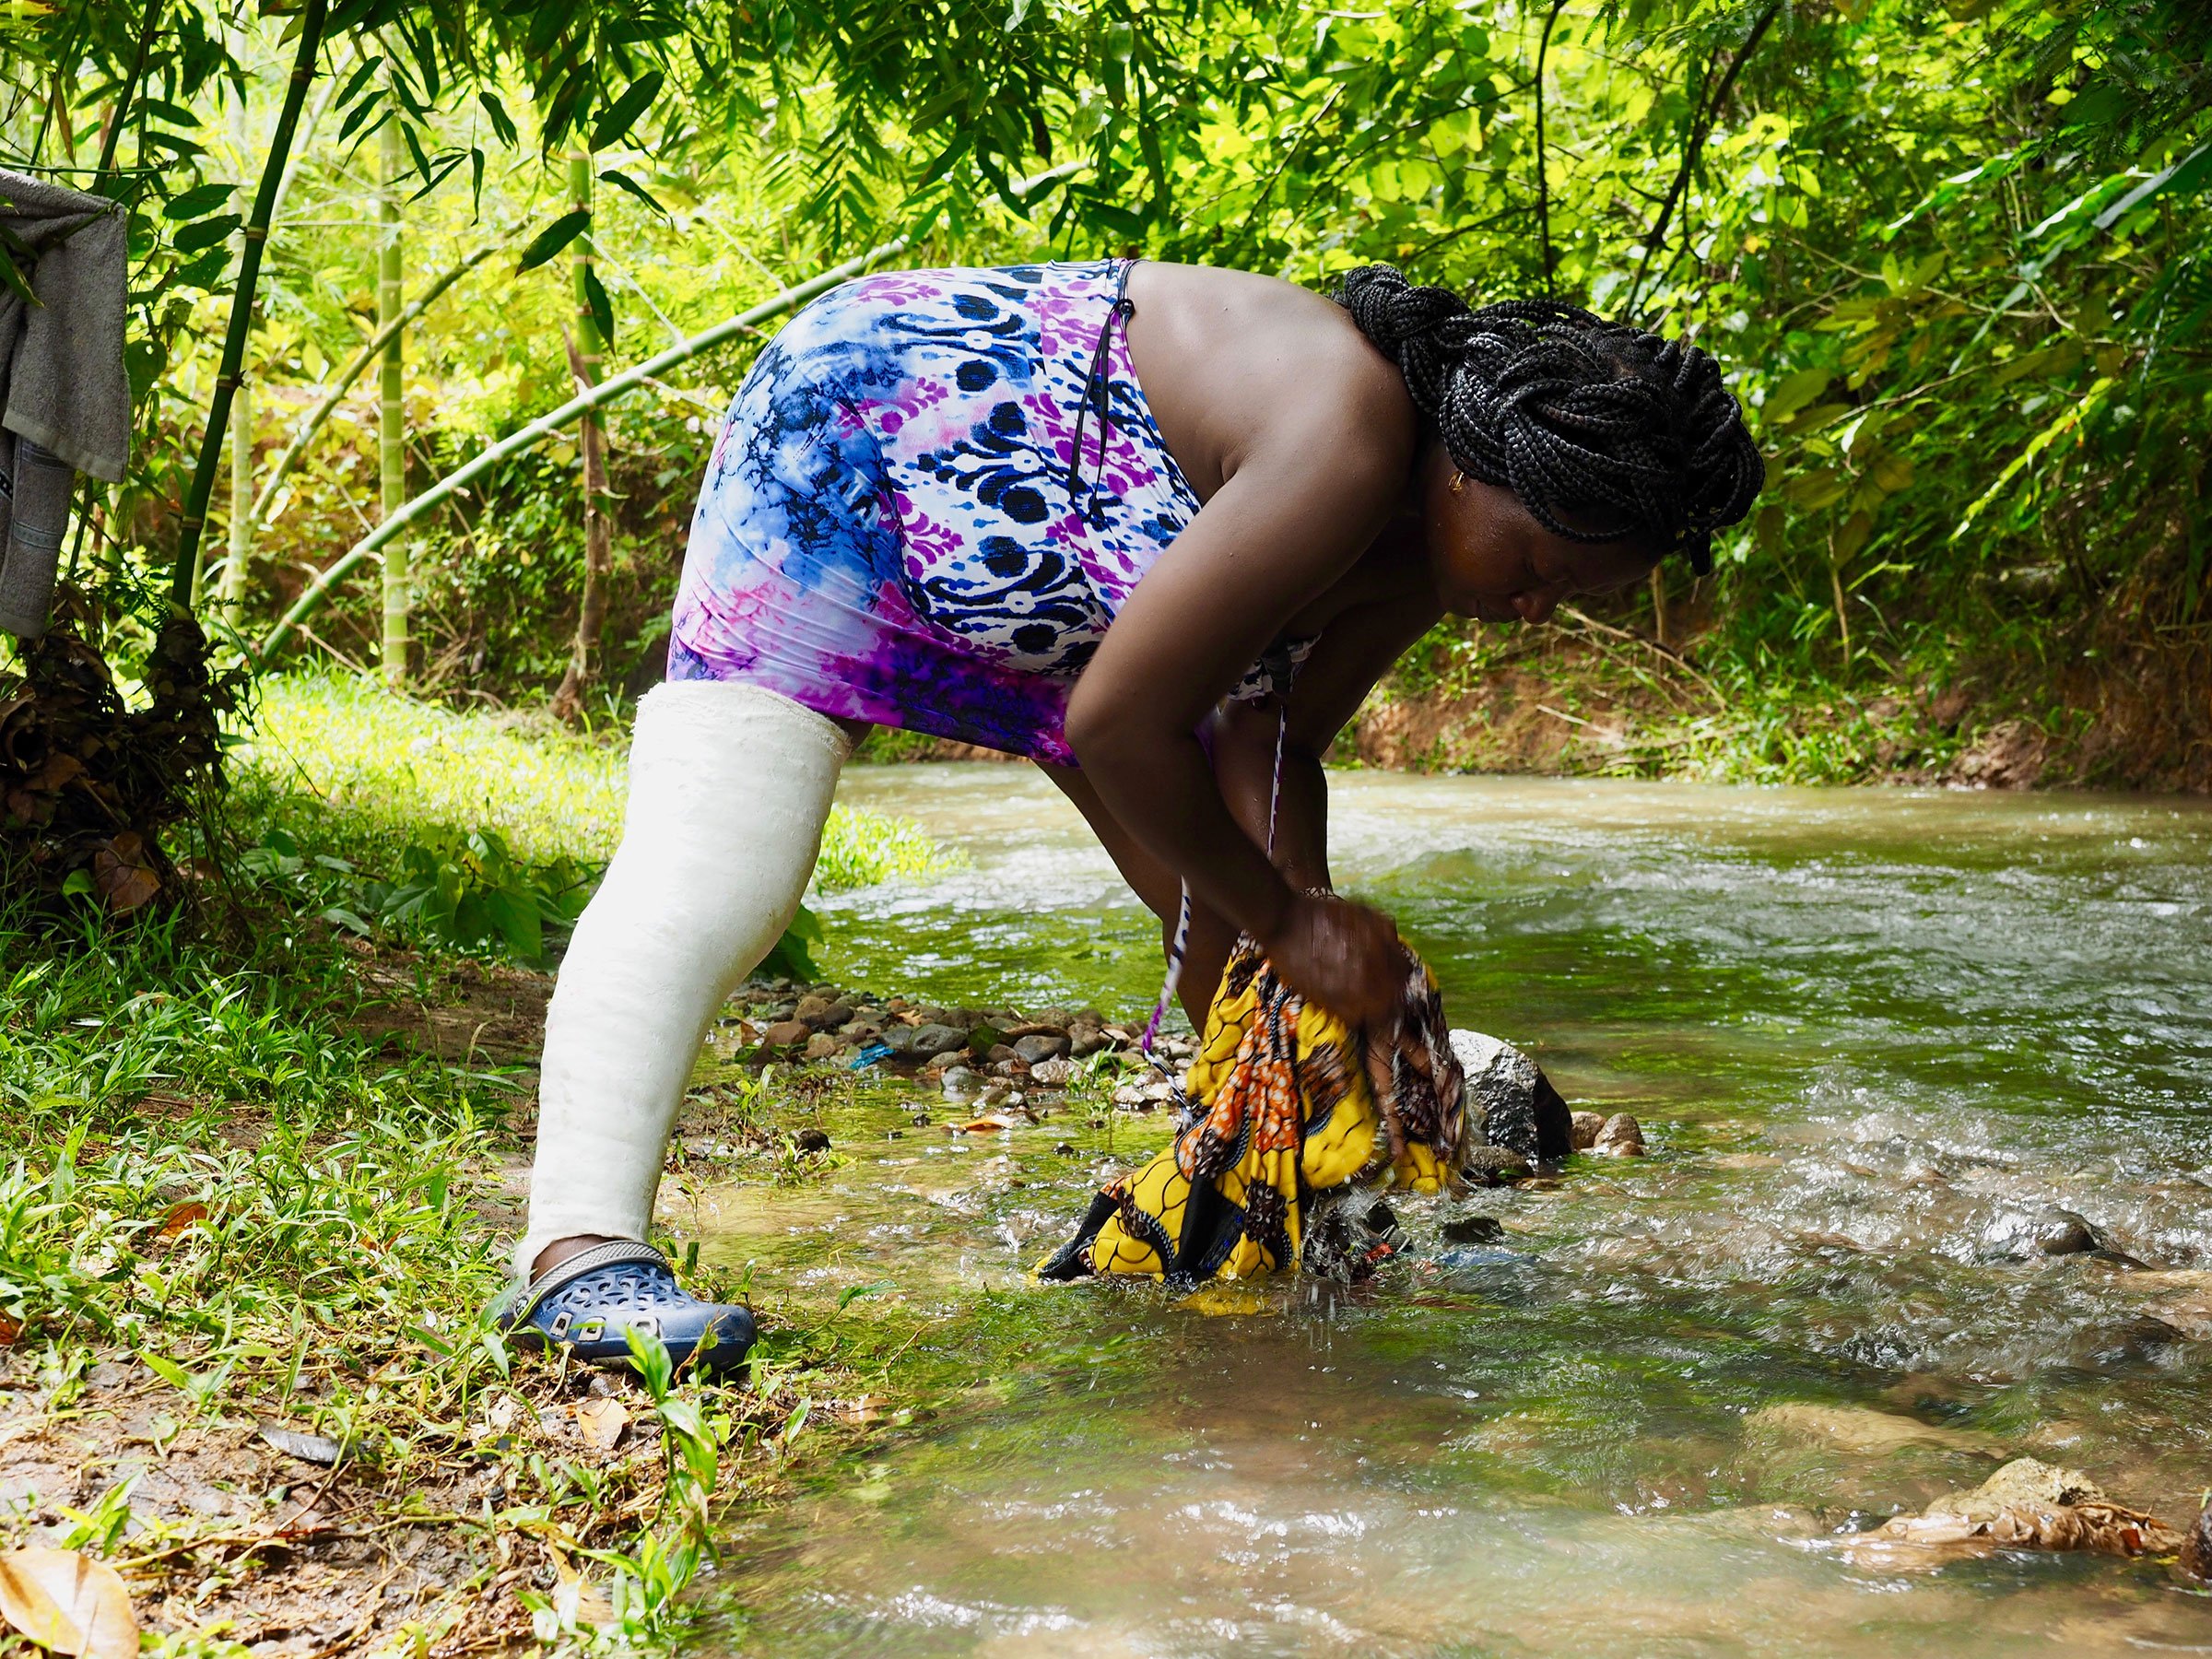 A woman washes clothing in the river